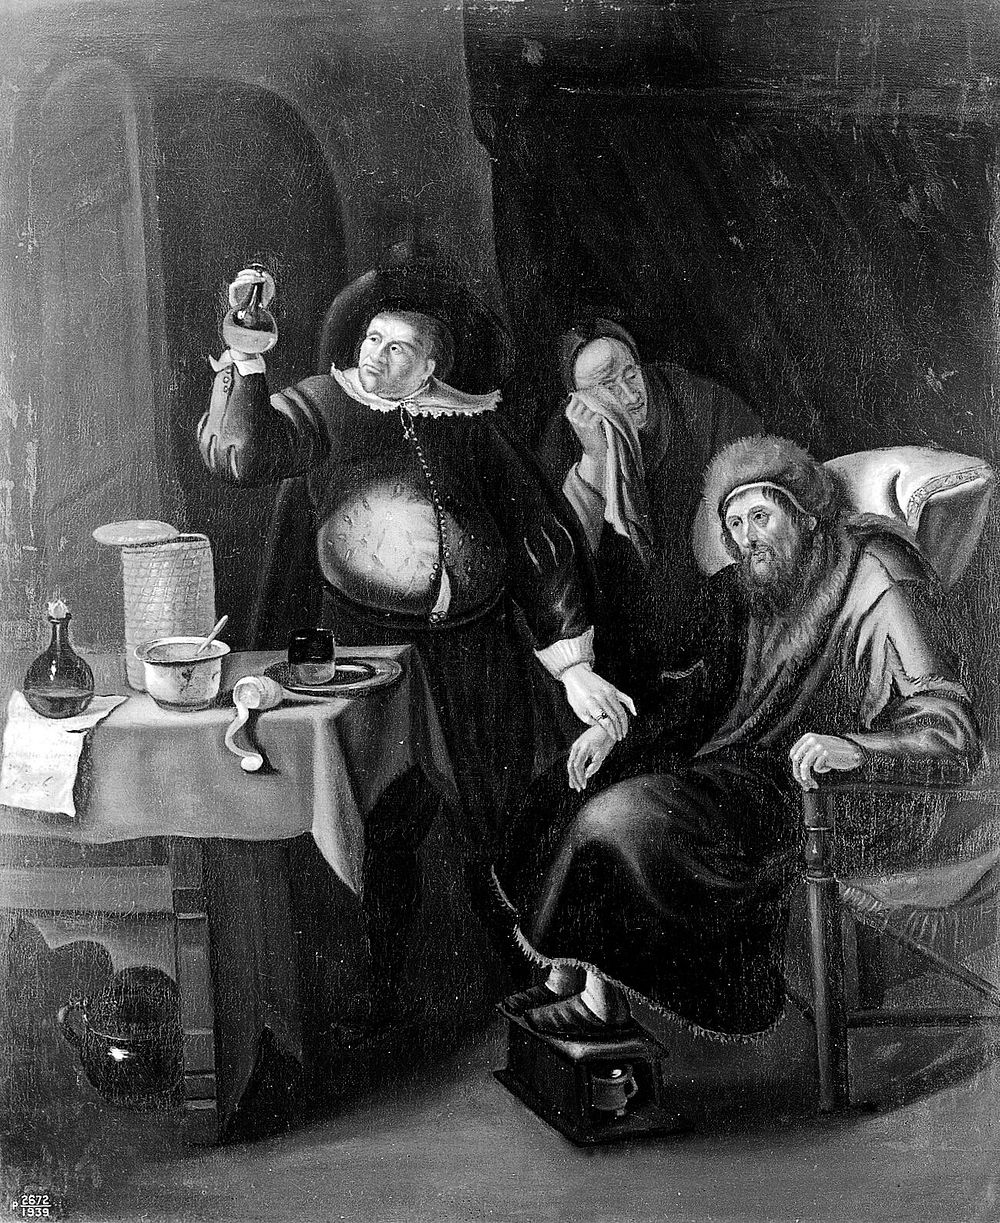 A medical practitioner examining the urine and taking the pulse of an elderly man. Oil painting by a follower of Jan Steen.